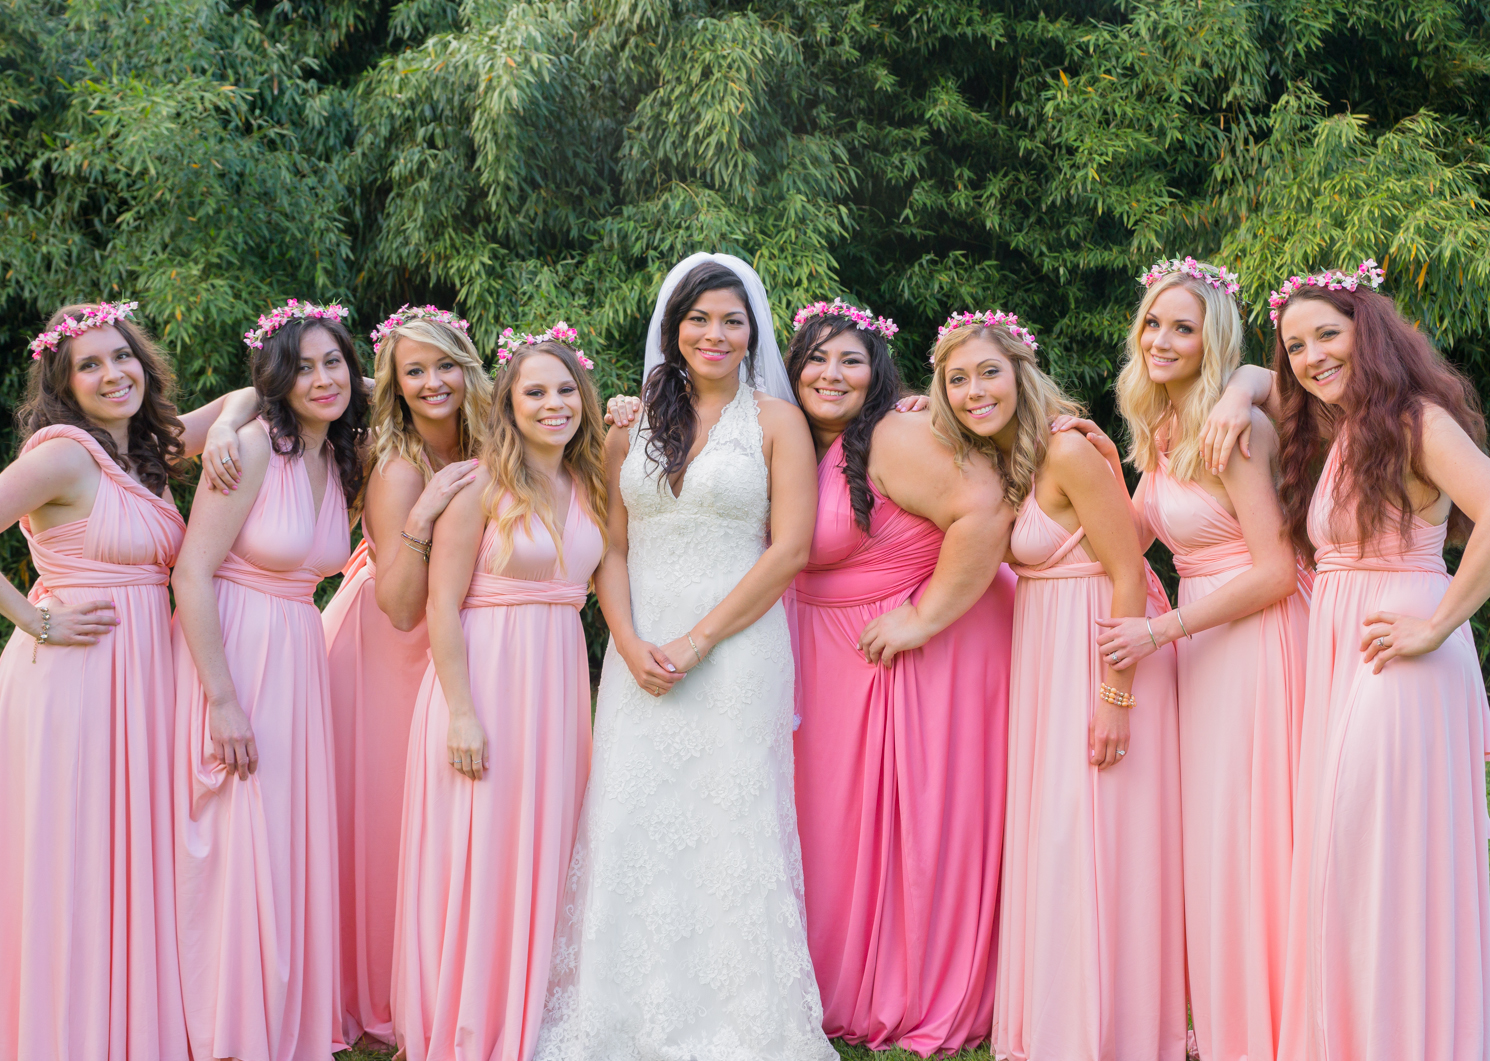 Bride and bridesmaids wedding photos in south east maryland on the water 